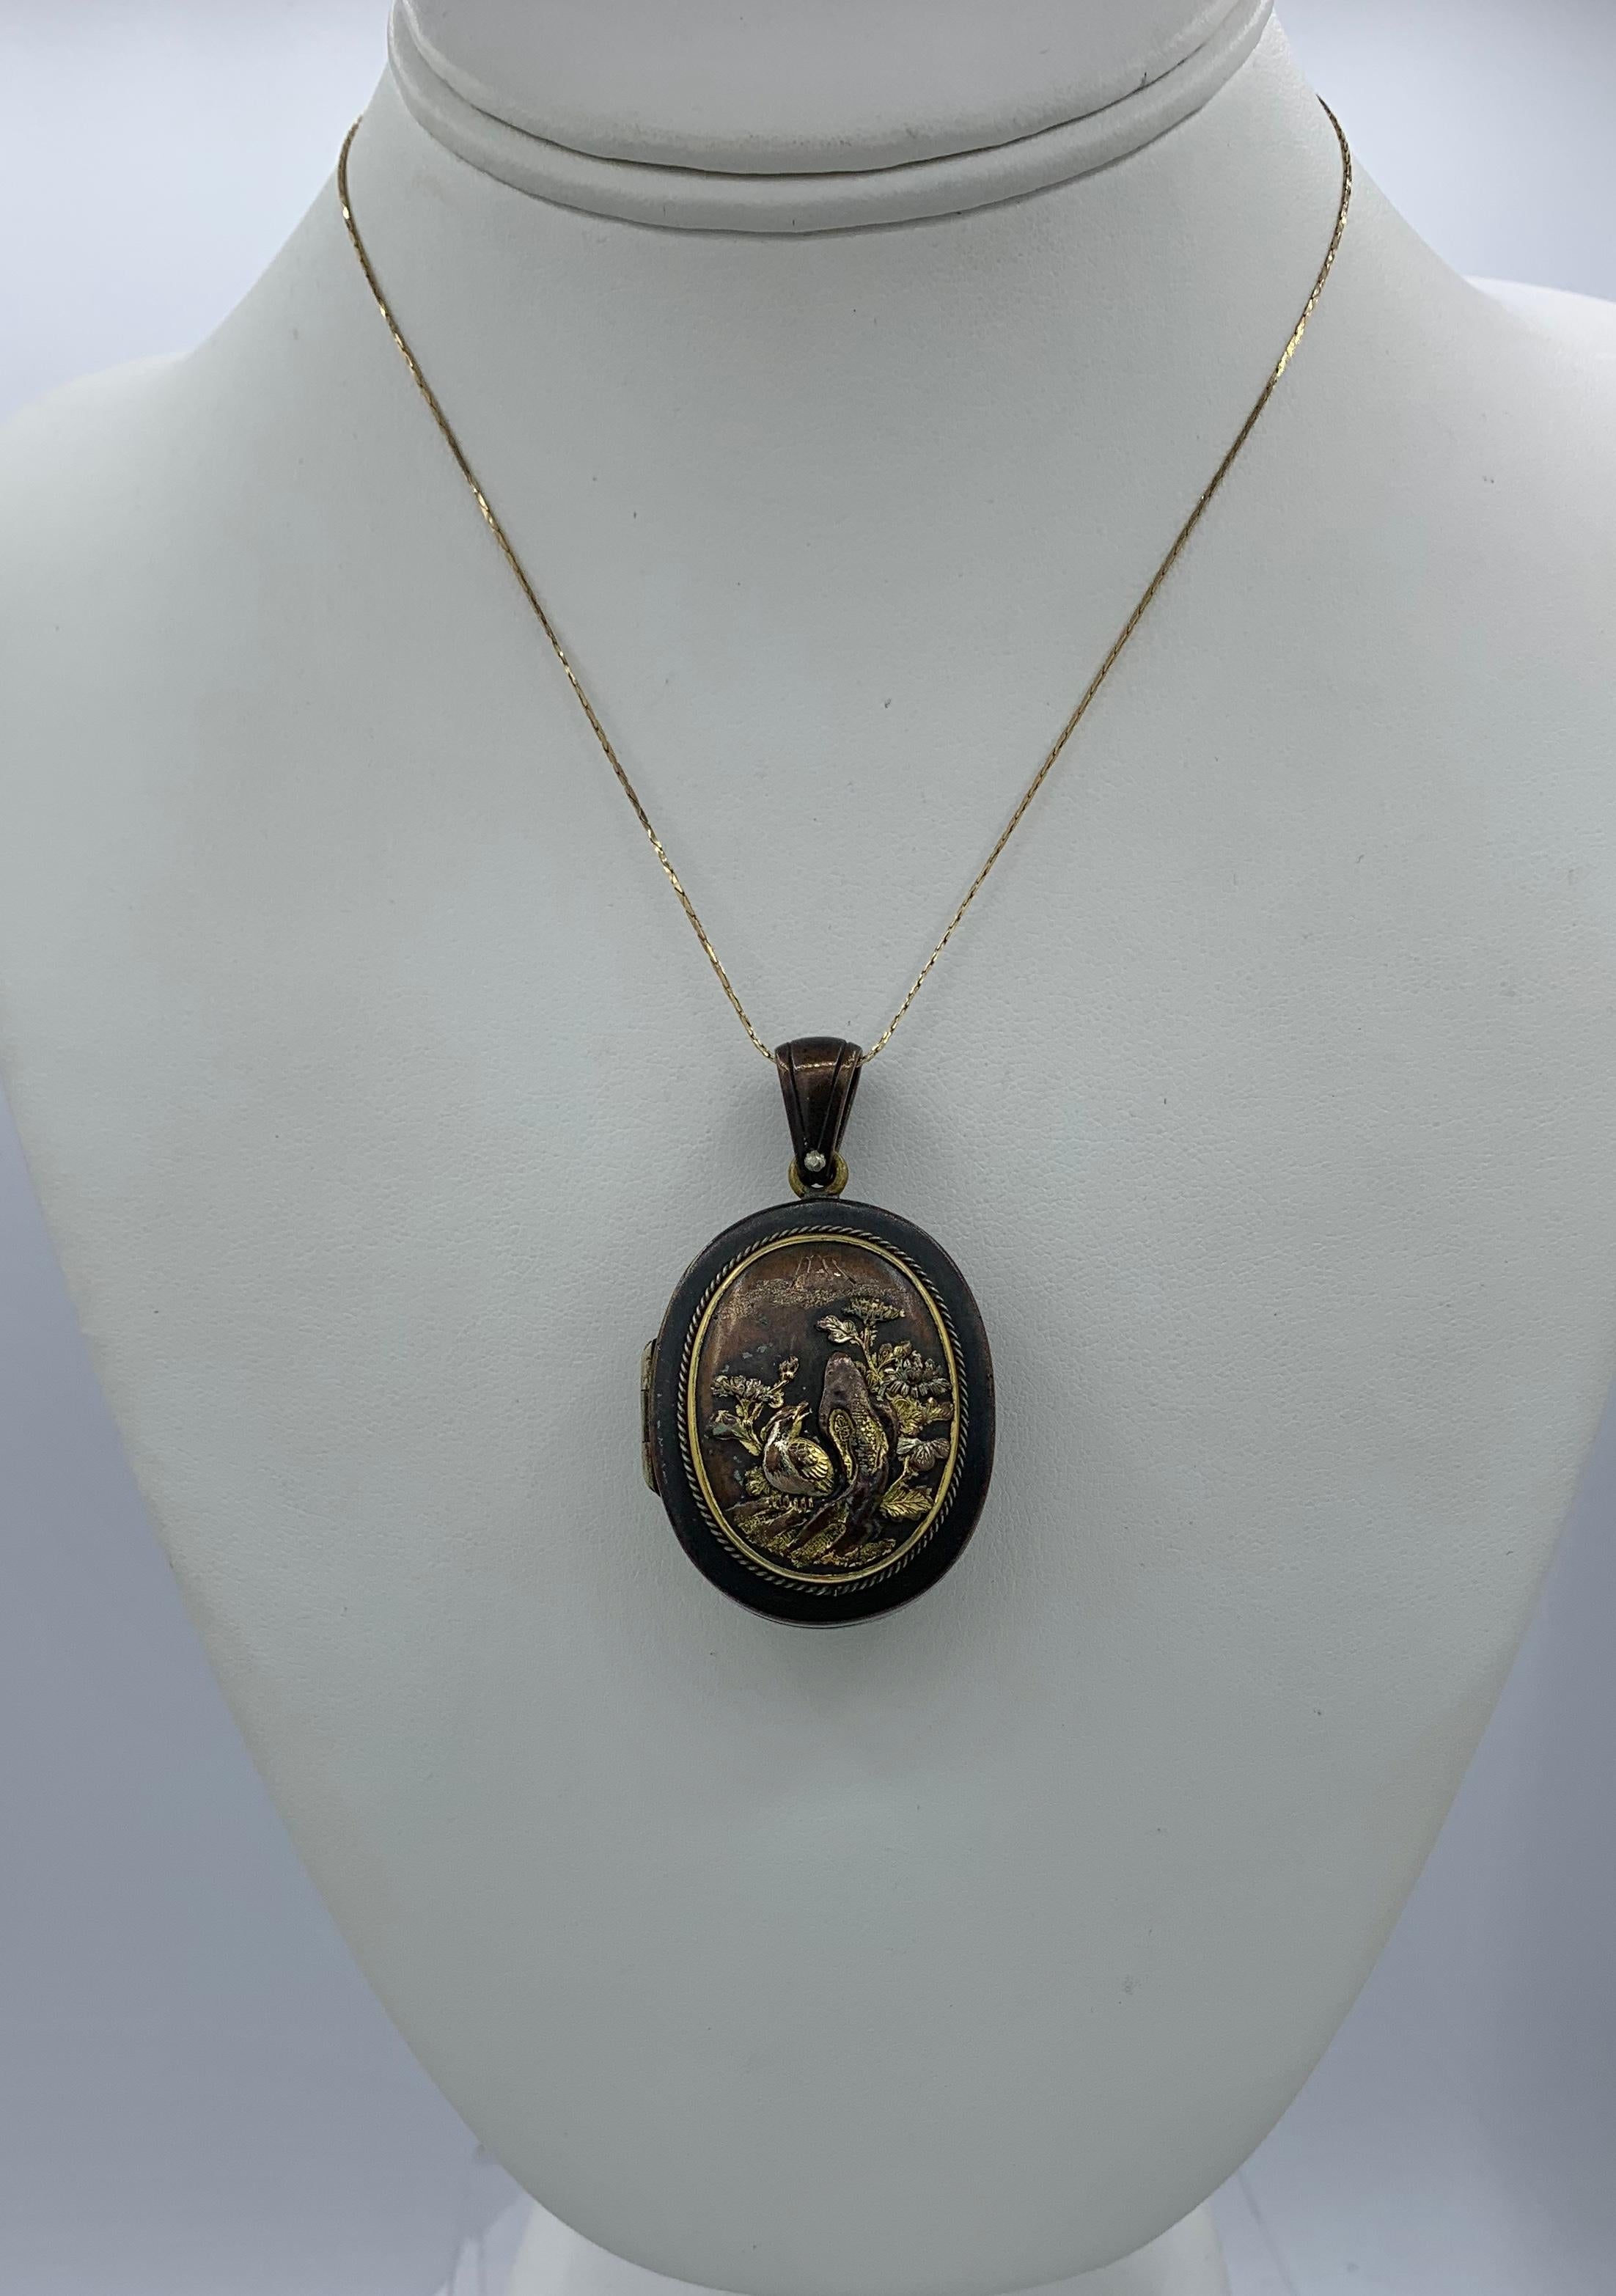 Rare Shakudo Locket Pendant Necklace Bird Rickshaw Mount Fuji Japan Antique In Excellent Condition For Sale In New York, NY